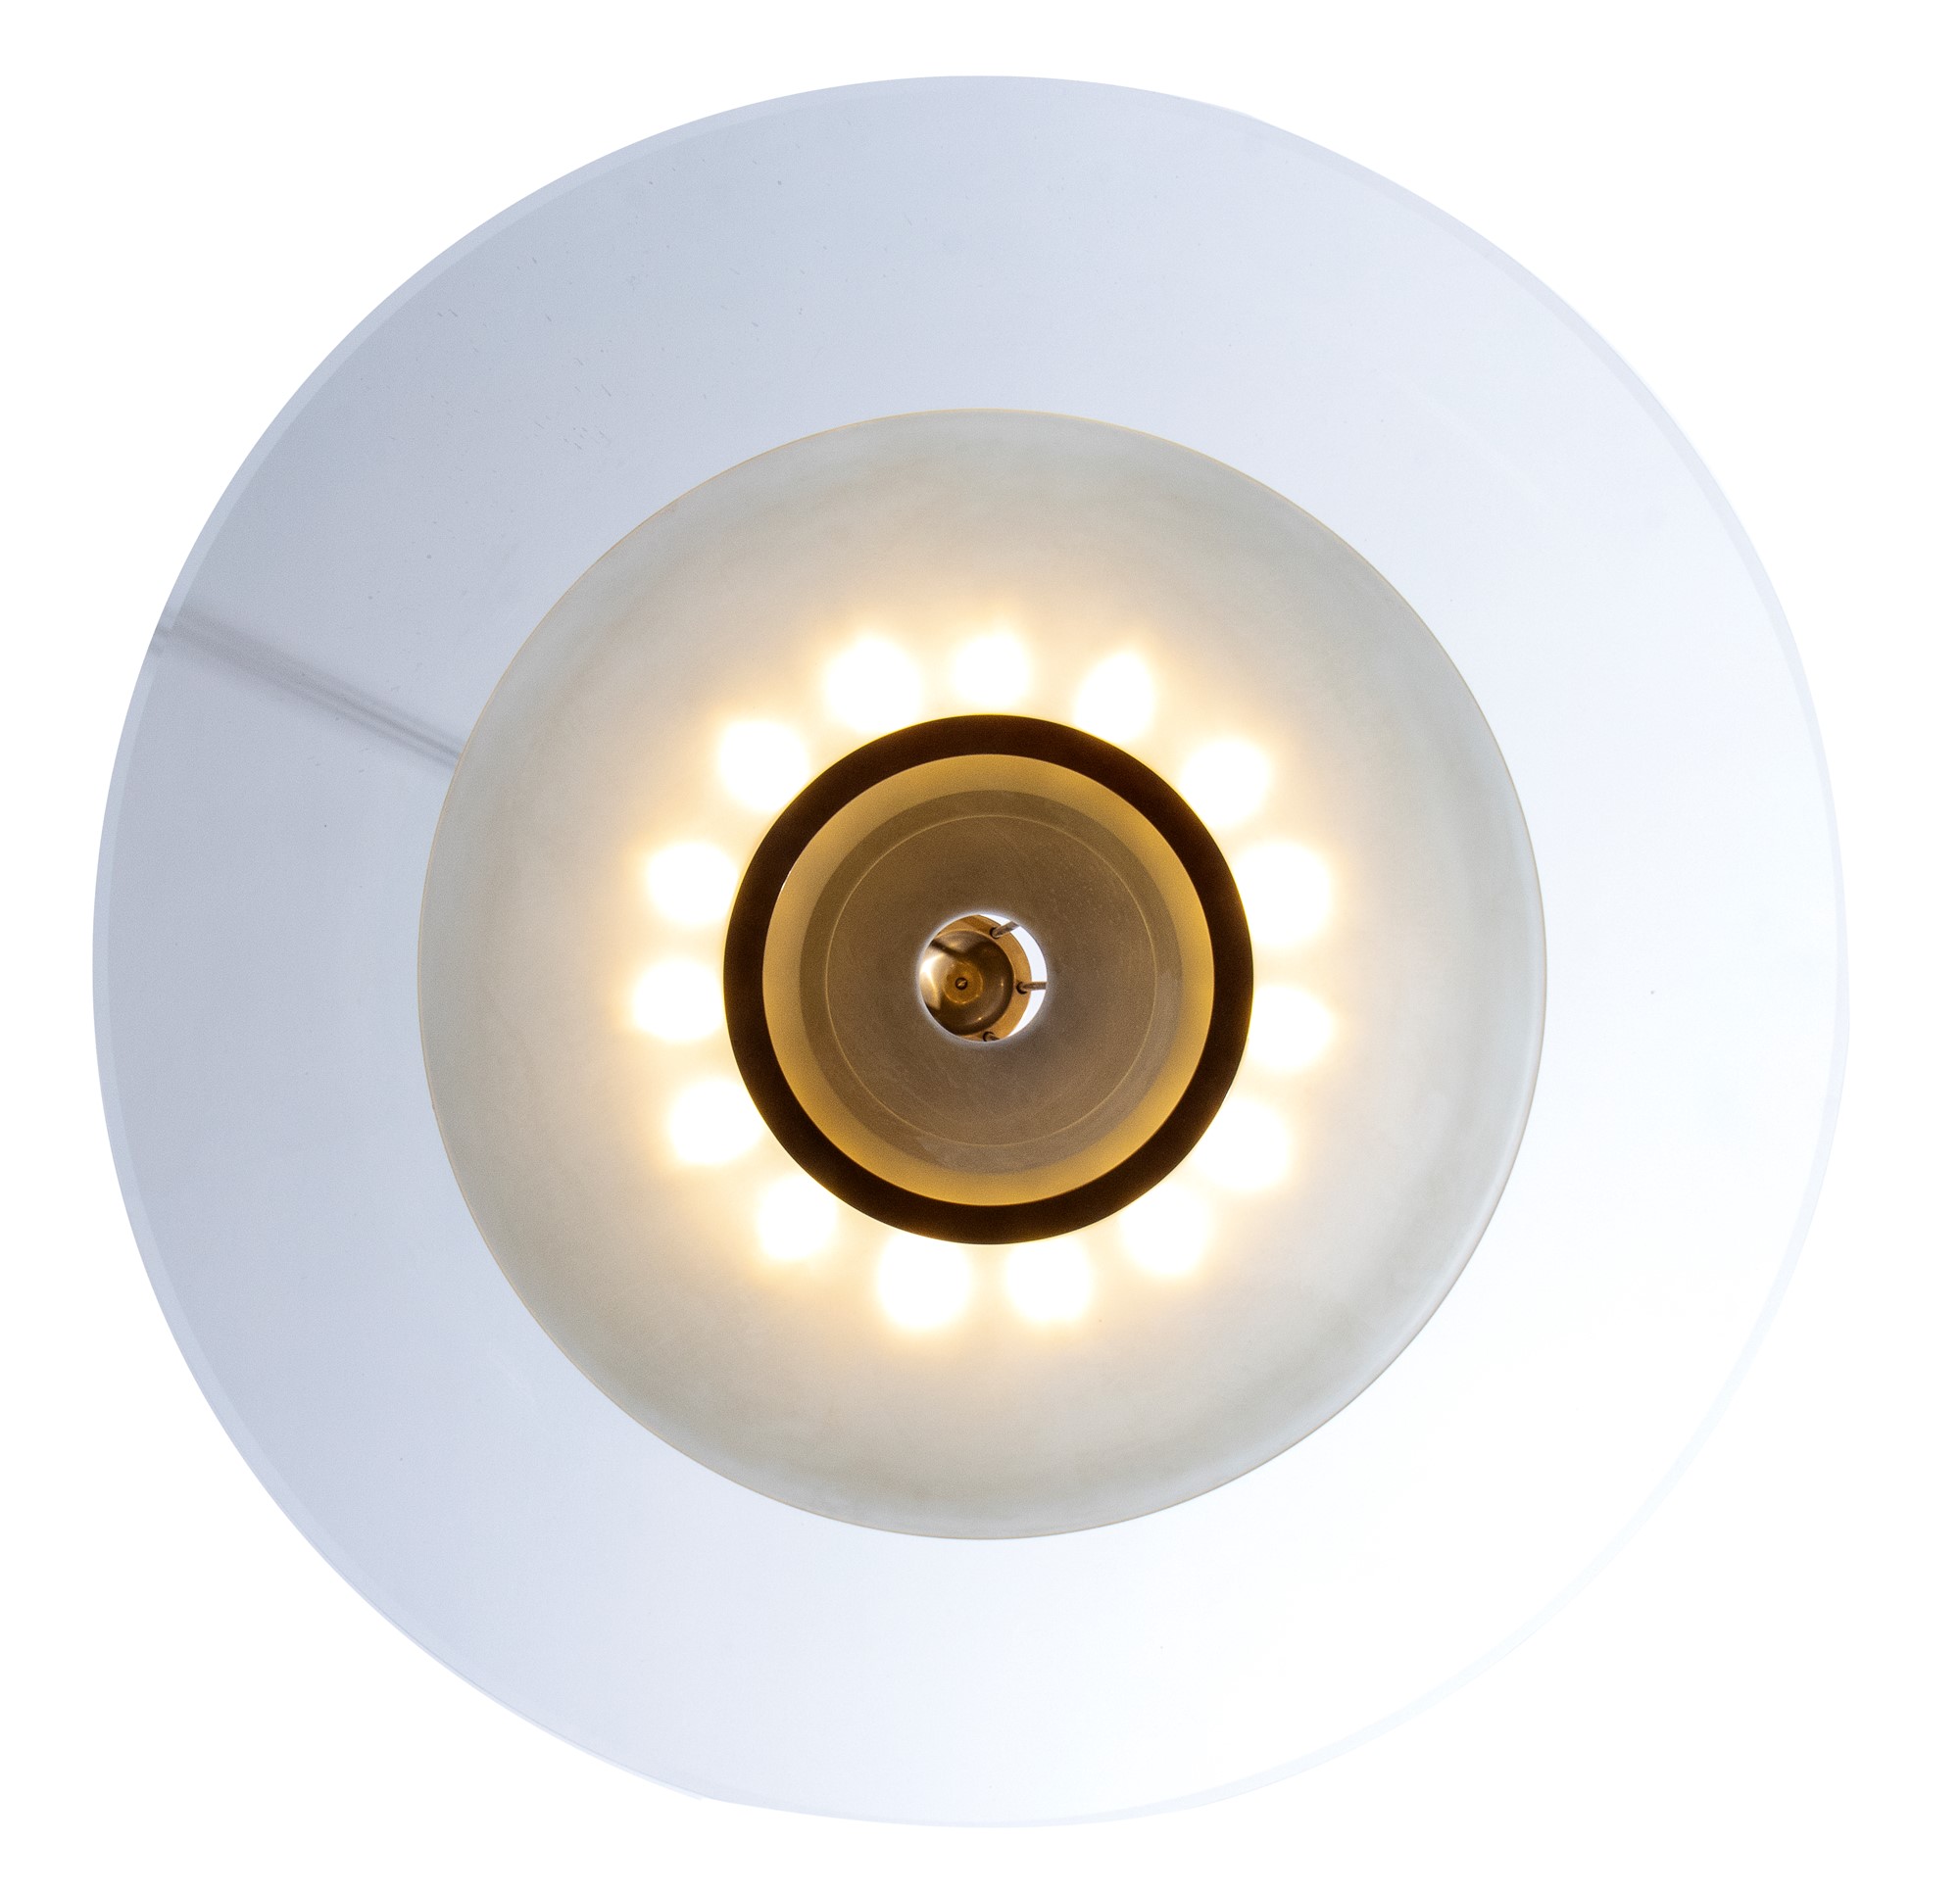 Max Ingrand Ceiling lamp mod. 1498 with brass structure, satin glass screen and crystal cup - Image 15 of 19